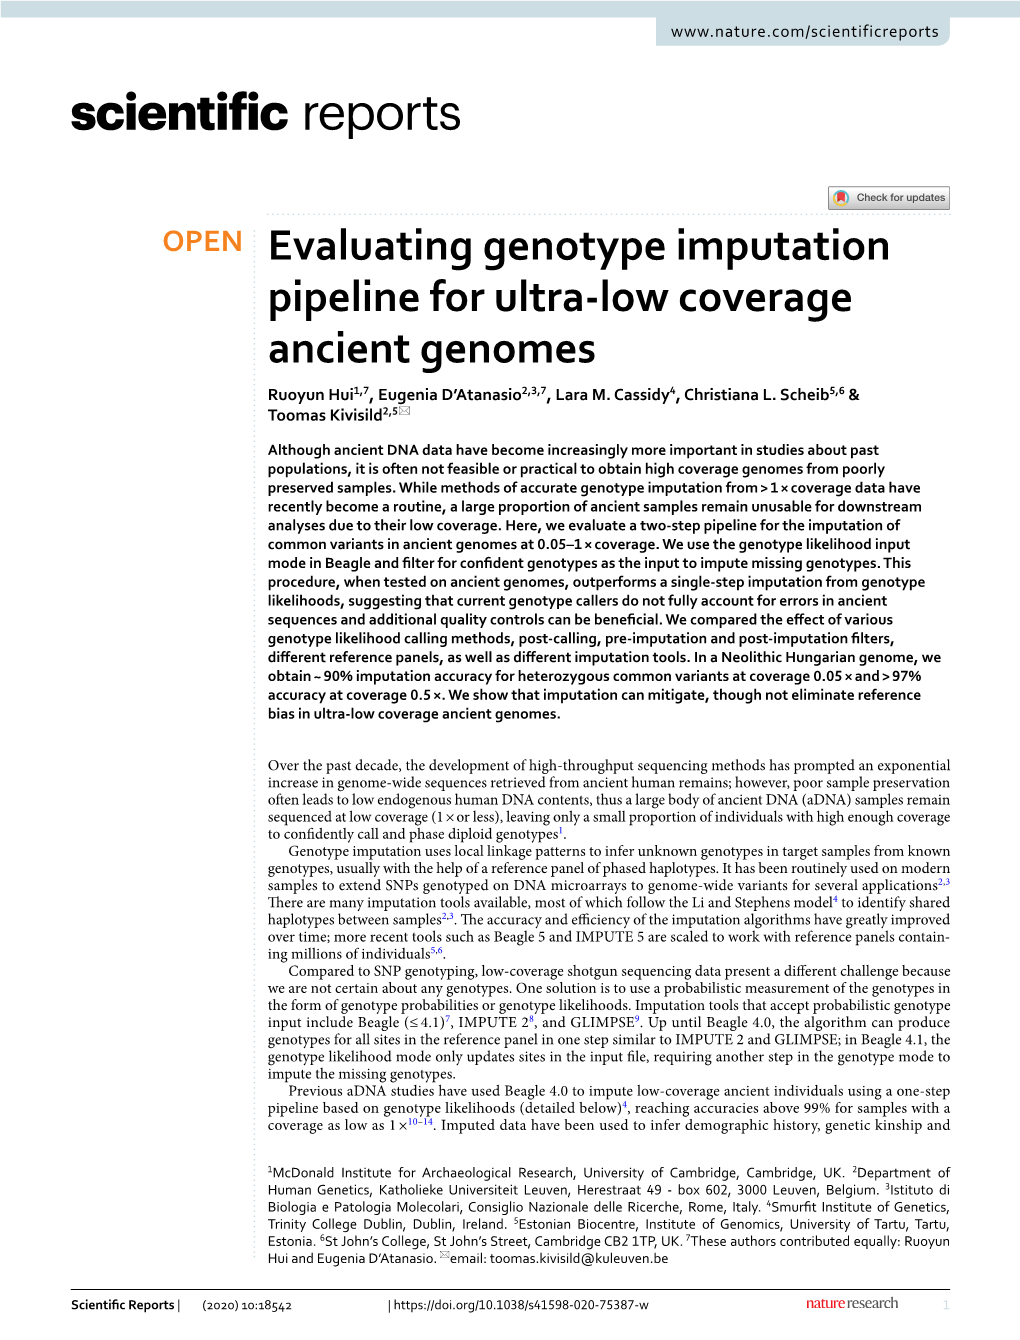 Evaluating Genotype Imputation Pipeline for Ultra-Low Coverage